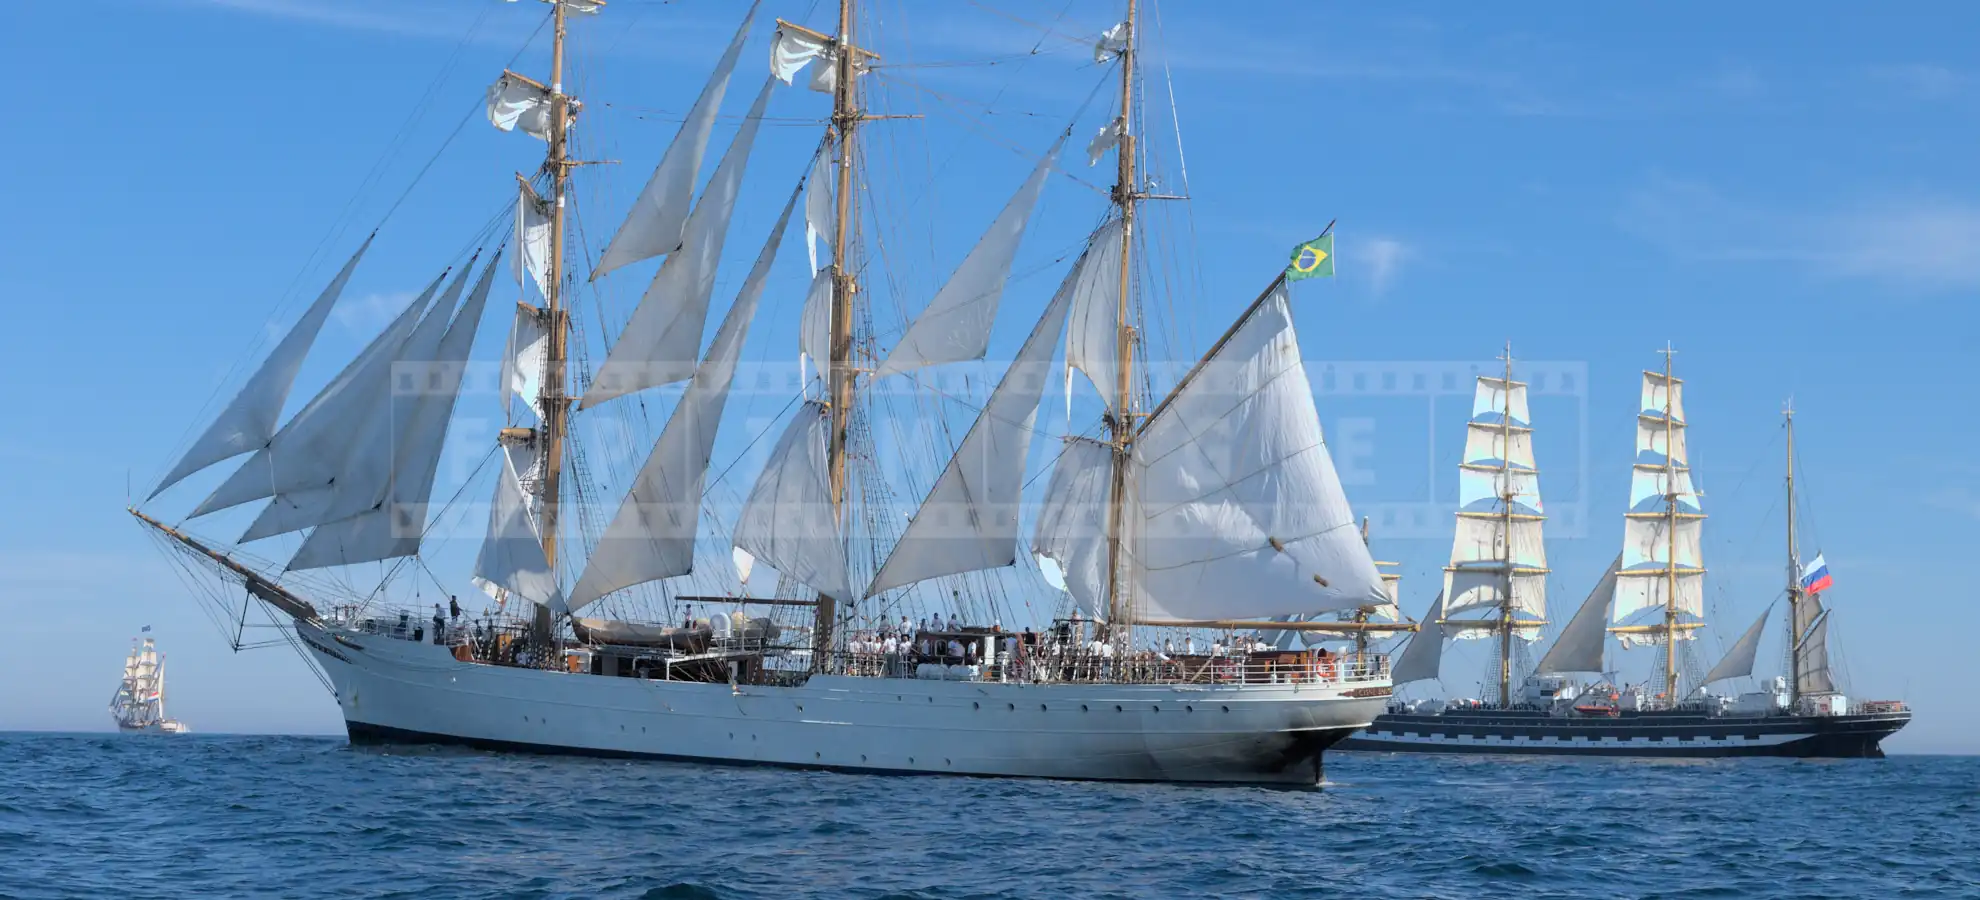 sailing ships Sagres, Kruzenstern and Europa at the start of tall ships race in Halifax